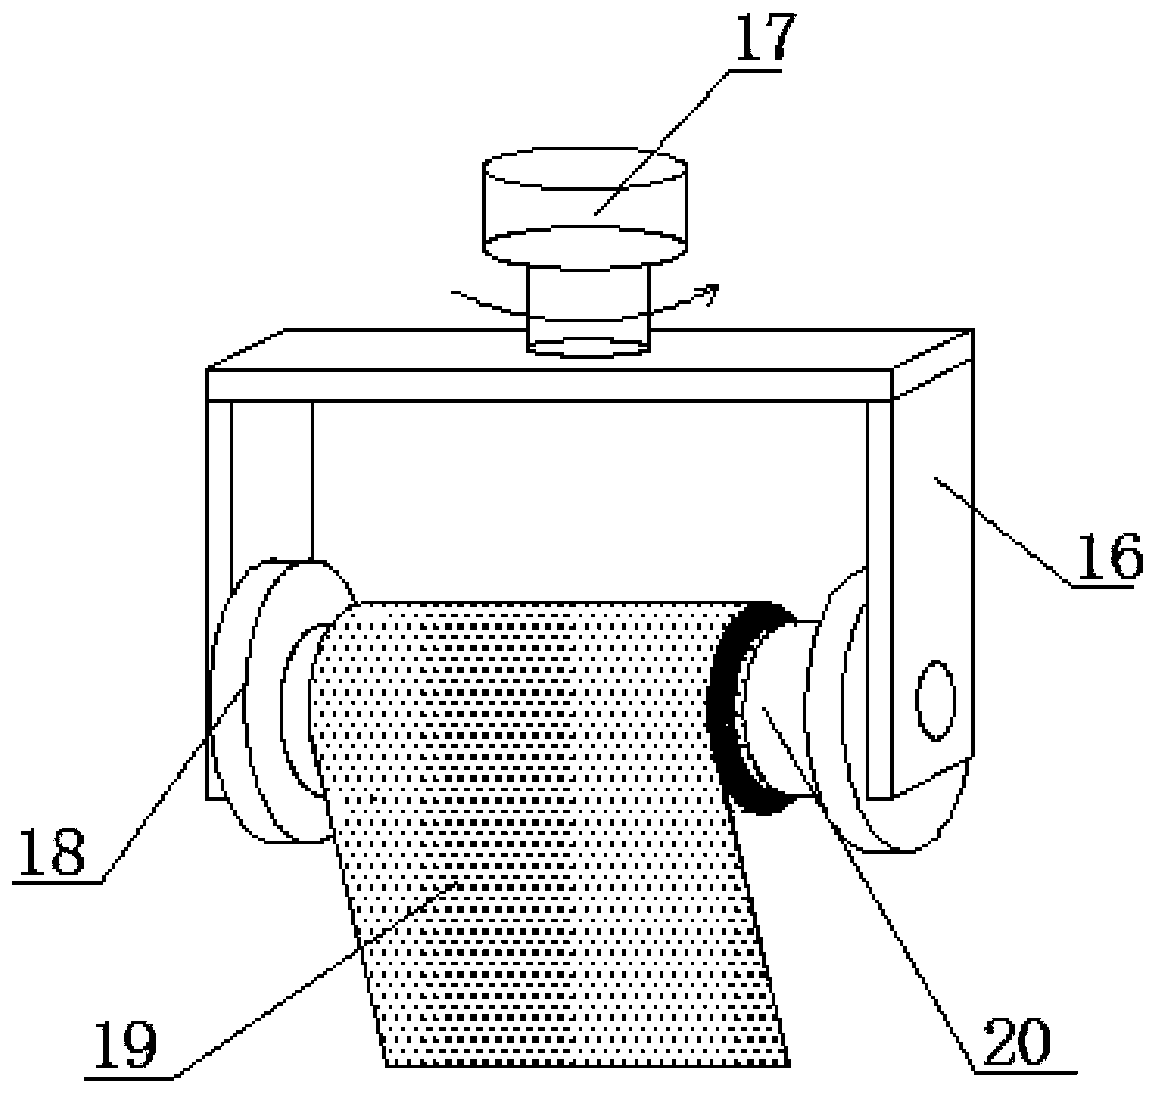 Auxiliary positioning device for product packaging